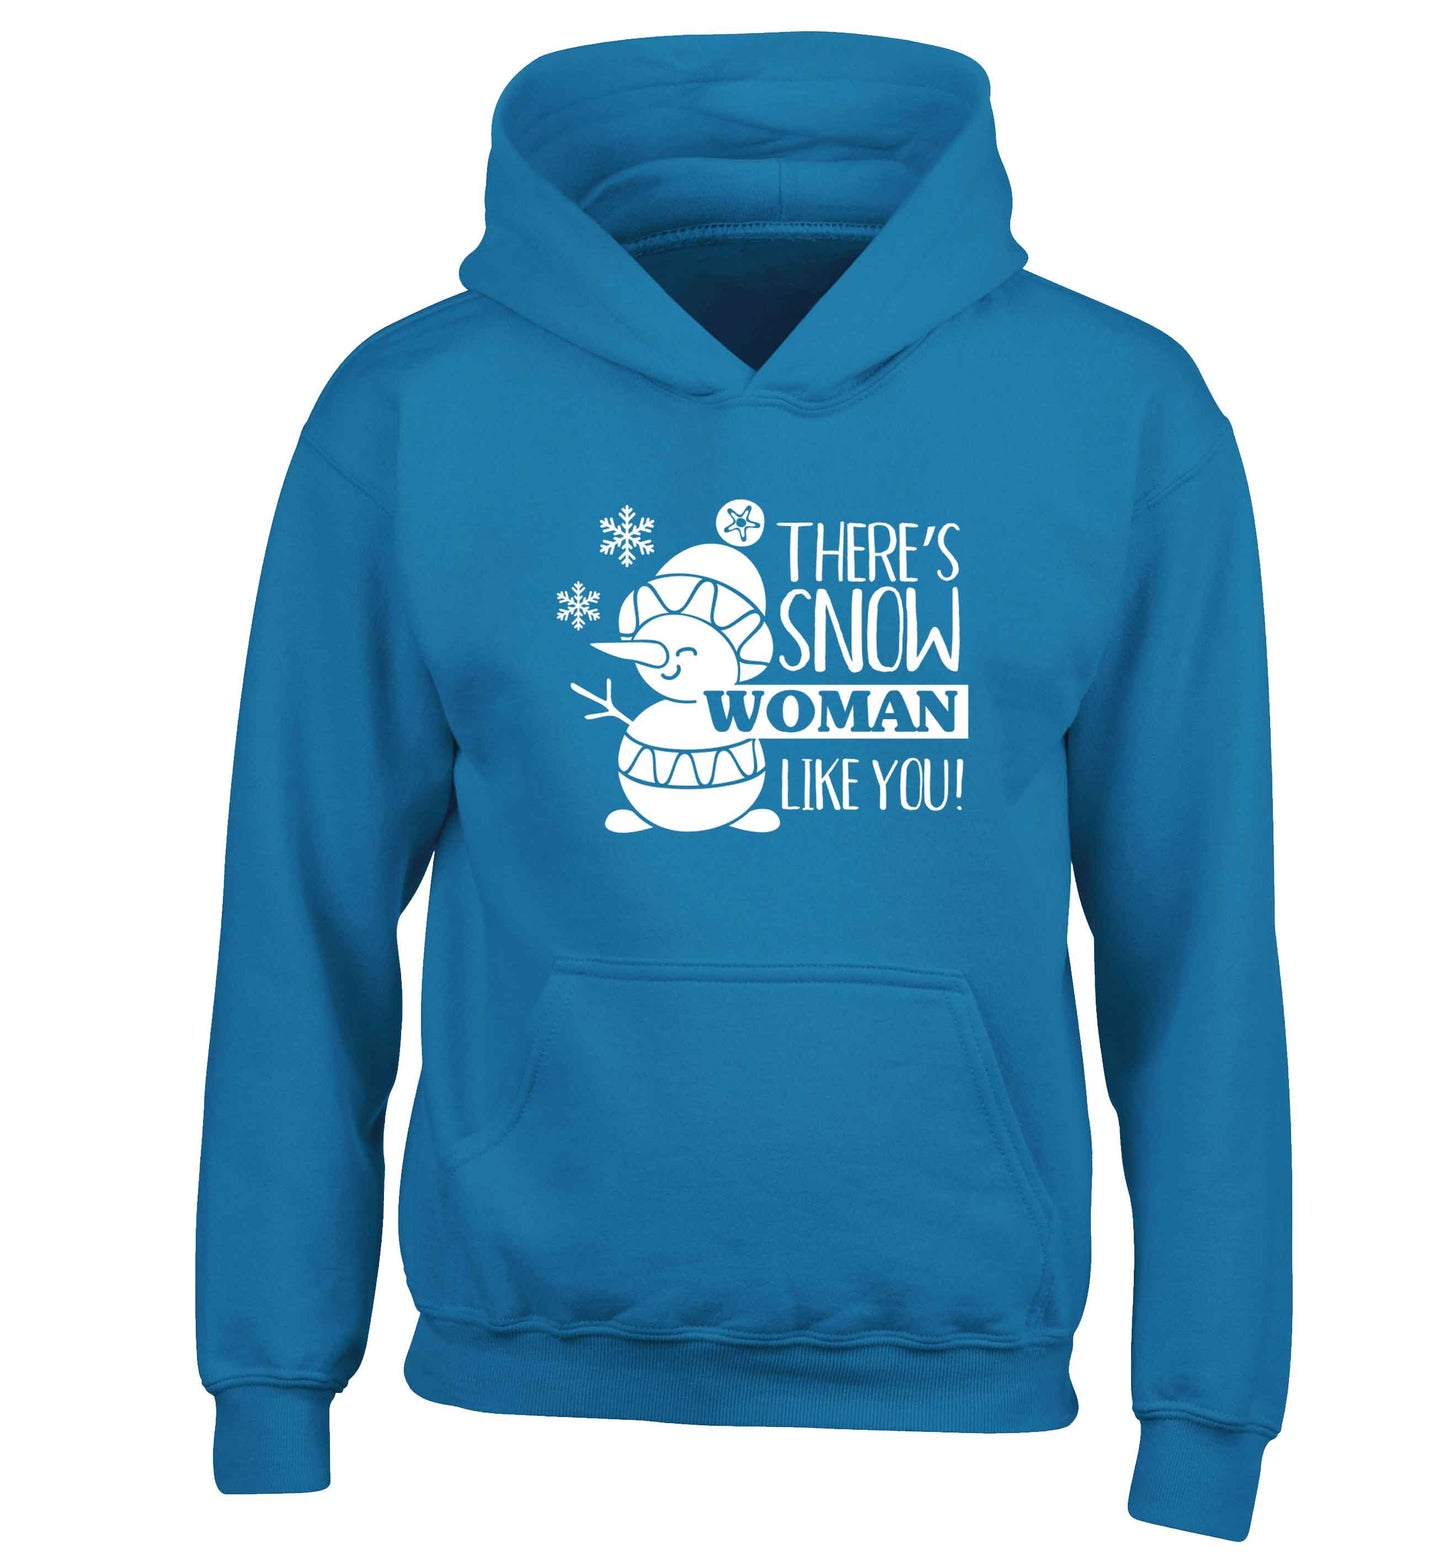 There's snow woman like you children's blue hoodie 12-13 Years